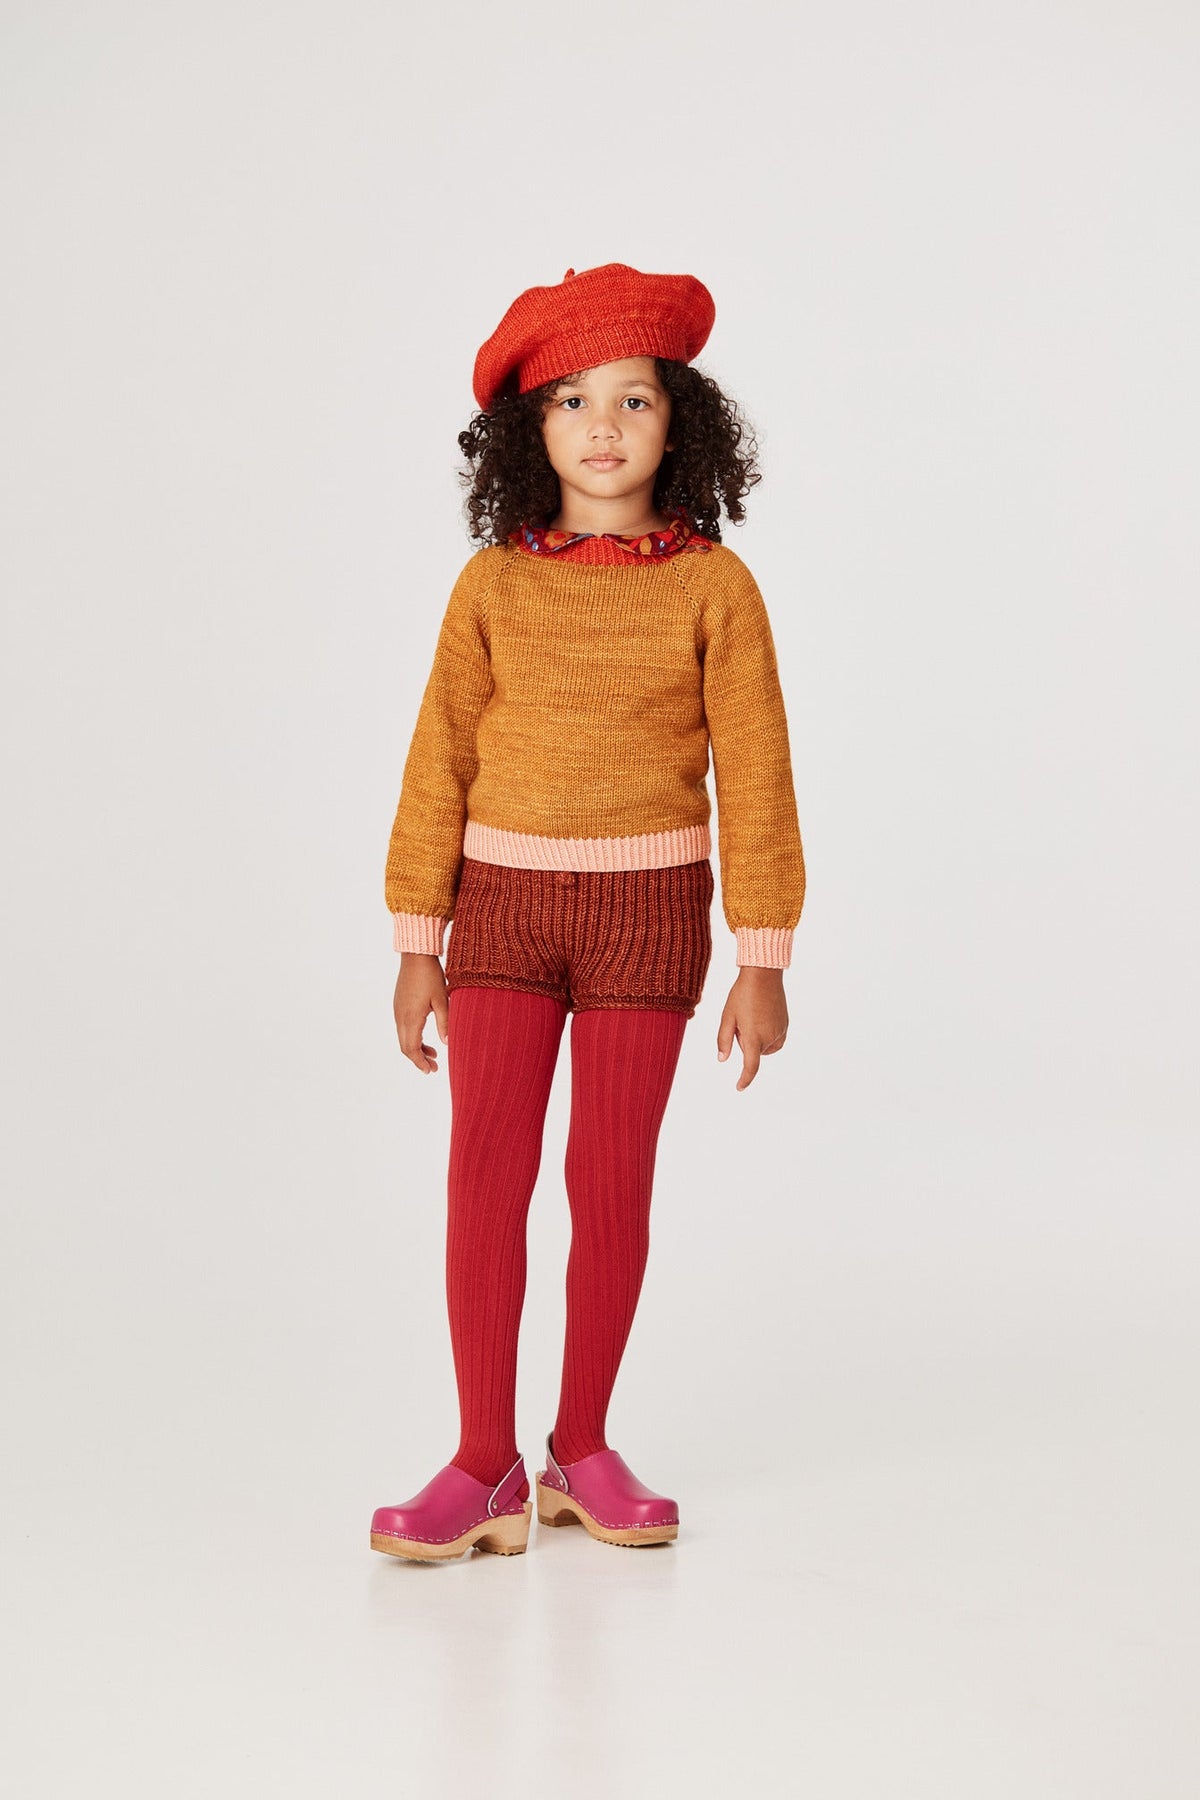 Casco Bay Boatneck - Marigold+Model is 45 inches tall, 44lbs, wearing a size 4-5y